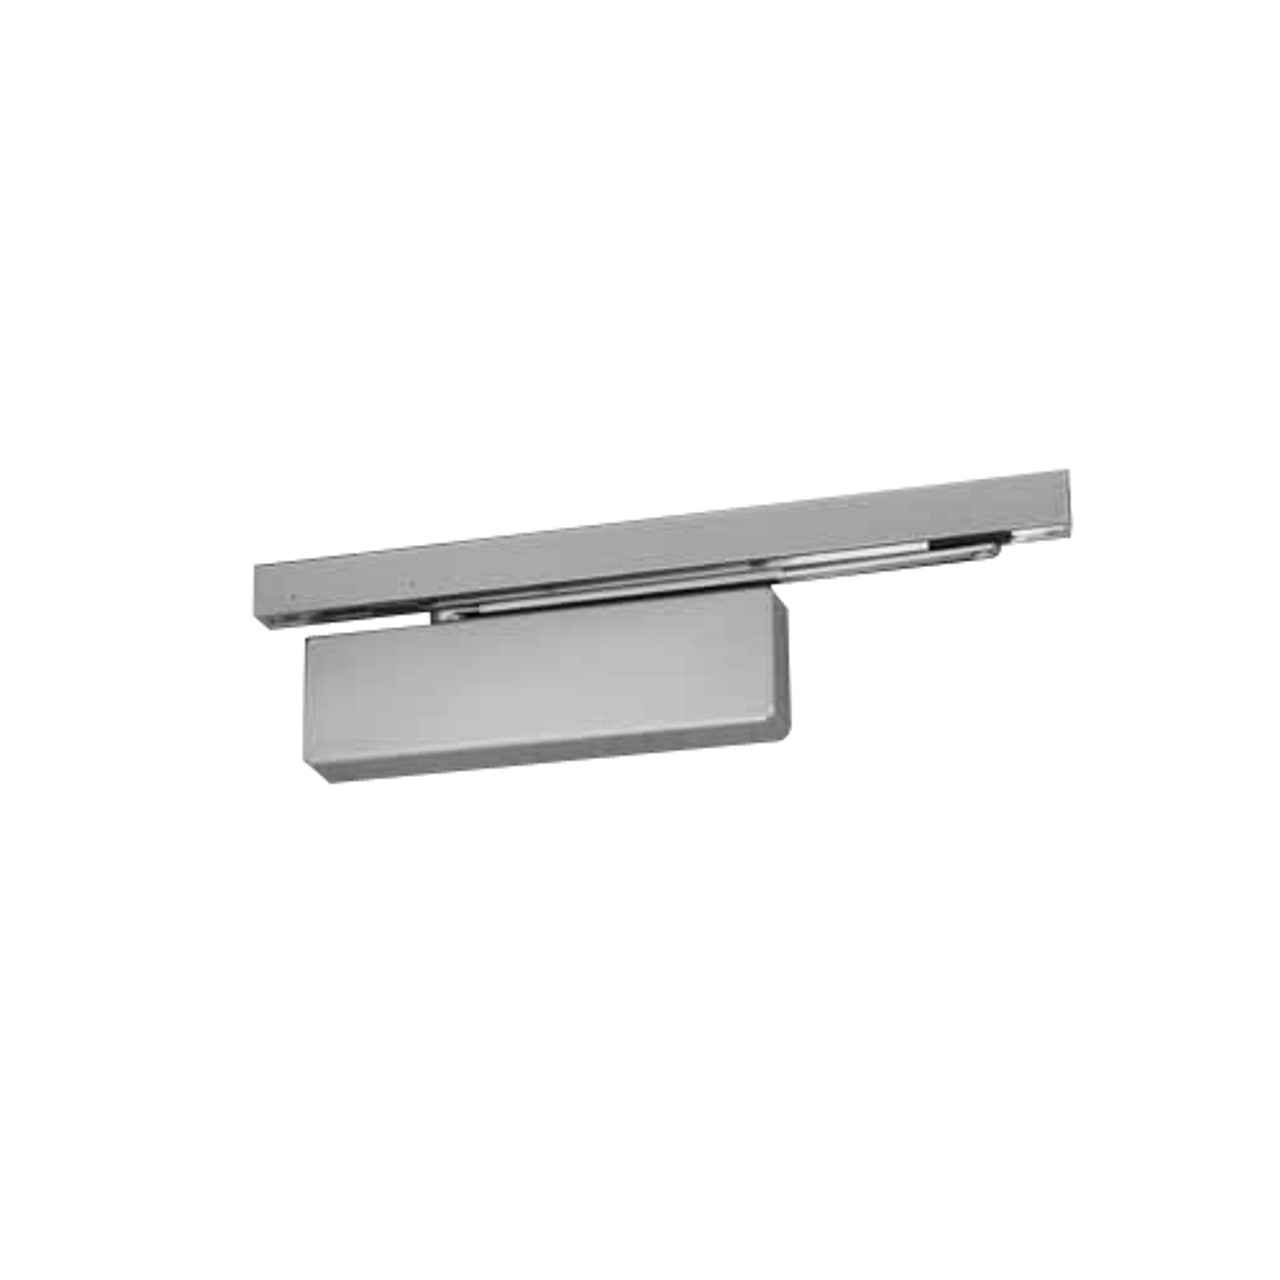 PS7500ST-689 Norton 7500 Series Non-Hold Open Institutional Door Closer with Push Side Slide Track in Aluminum Finish